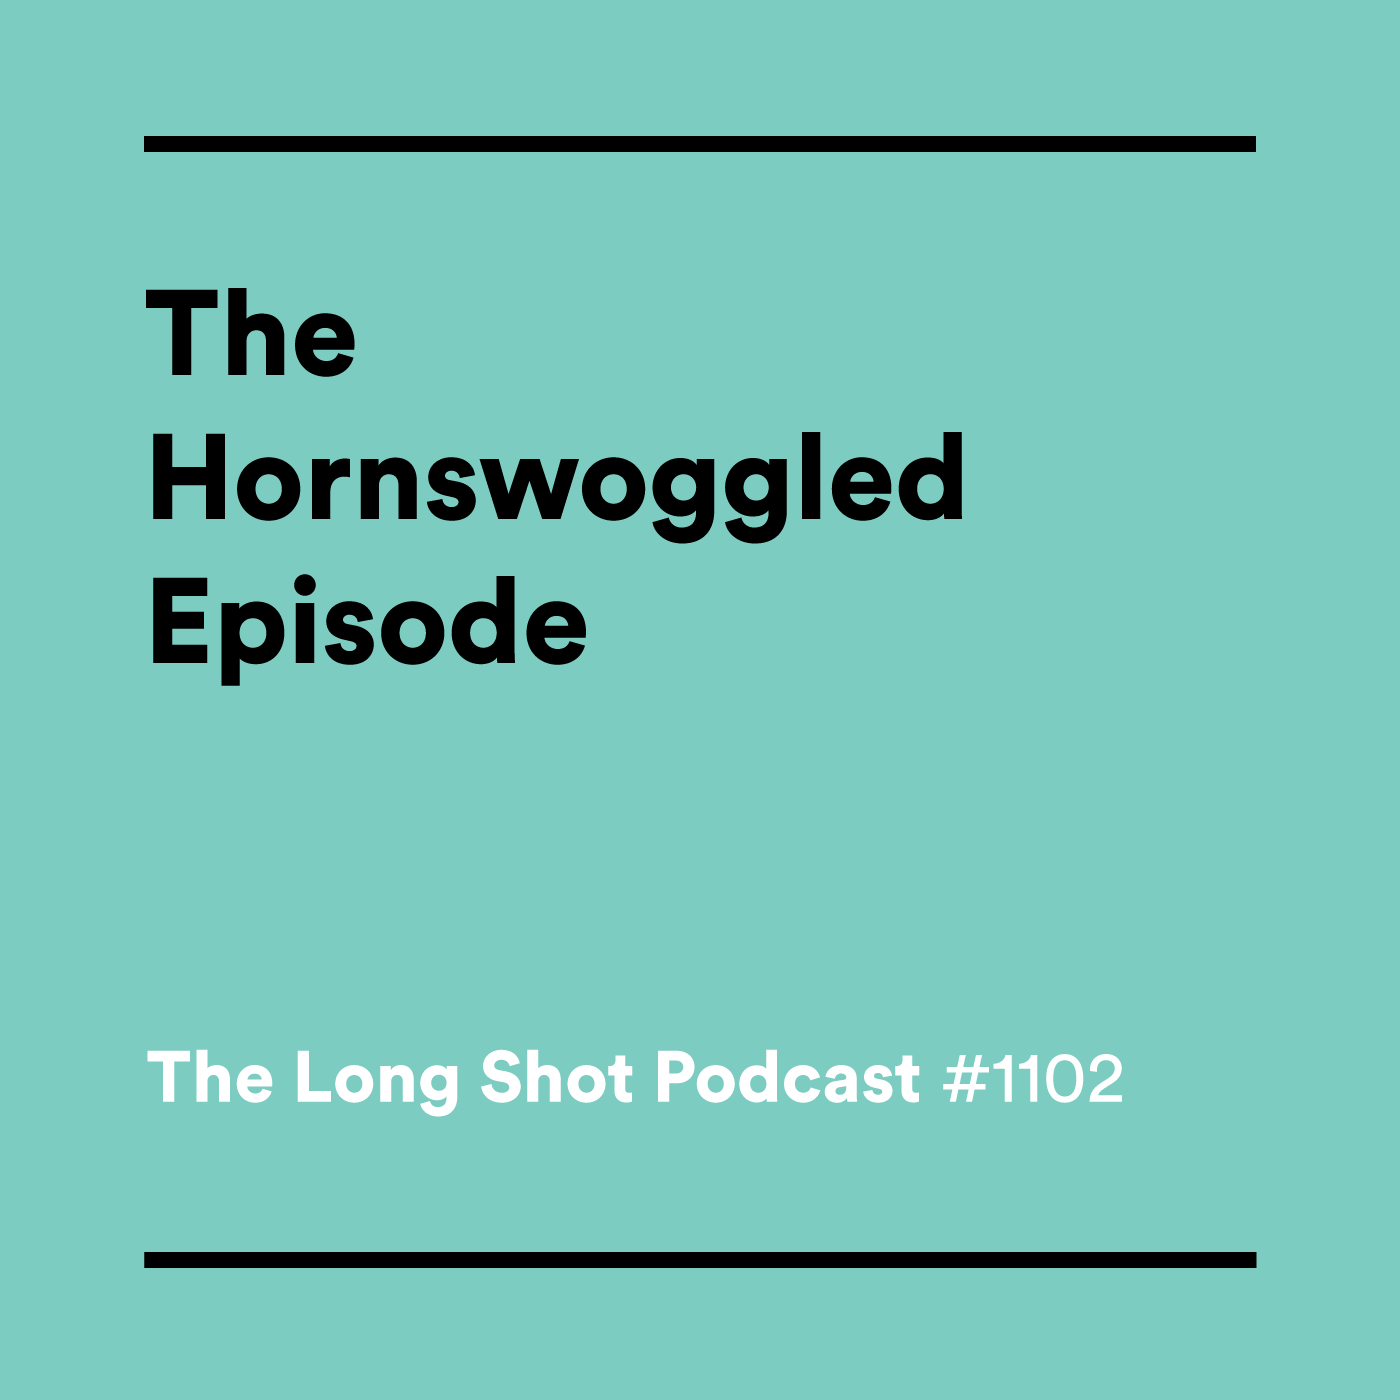 #1102 The Hornswoggled Episode